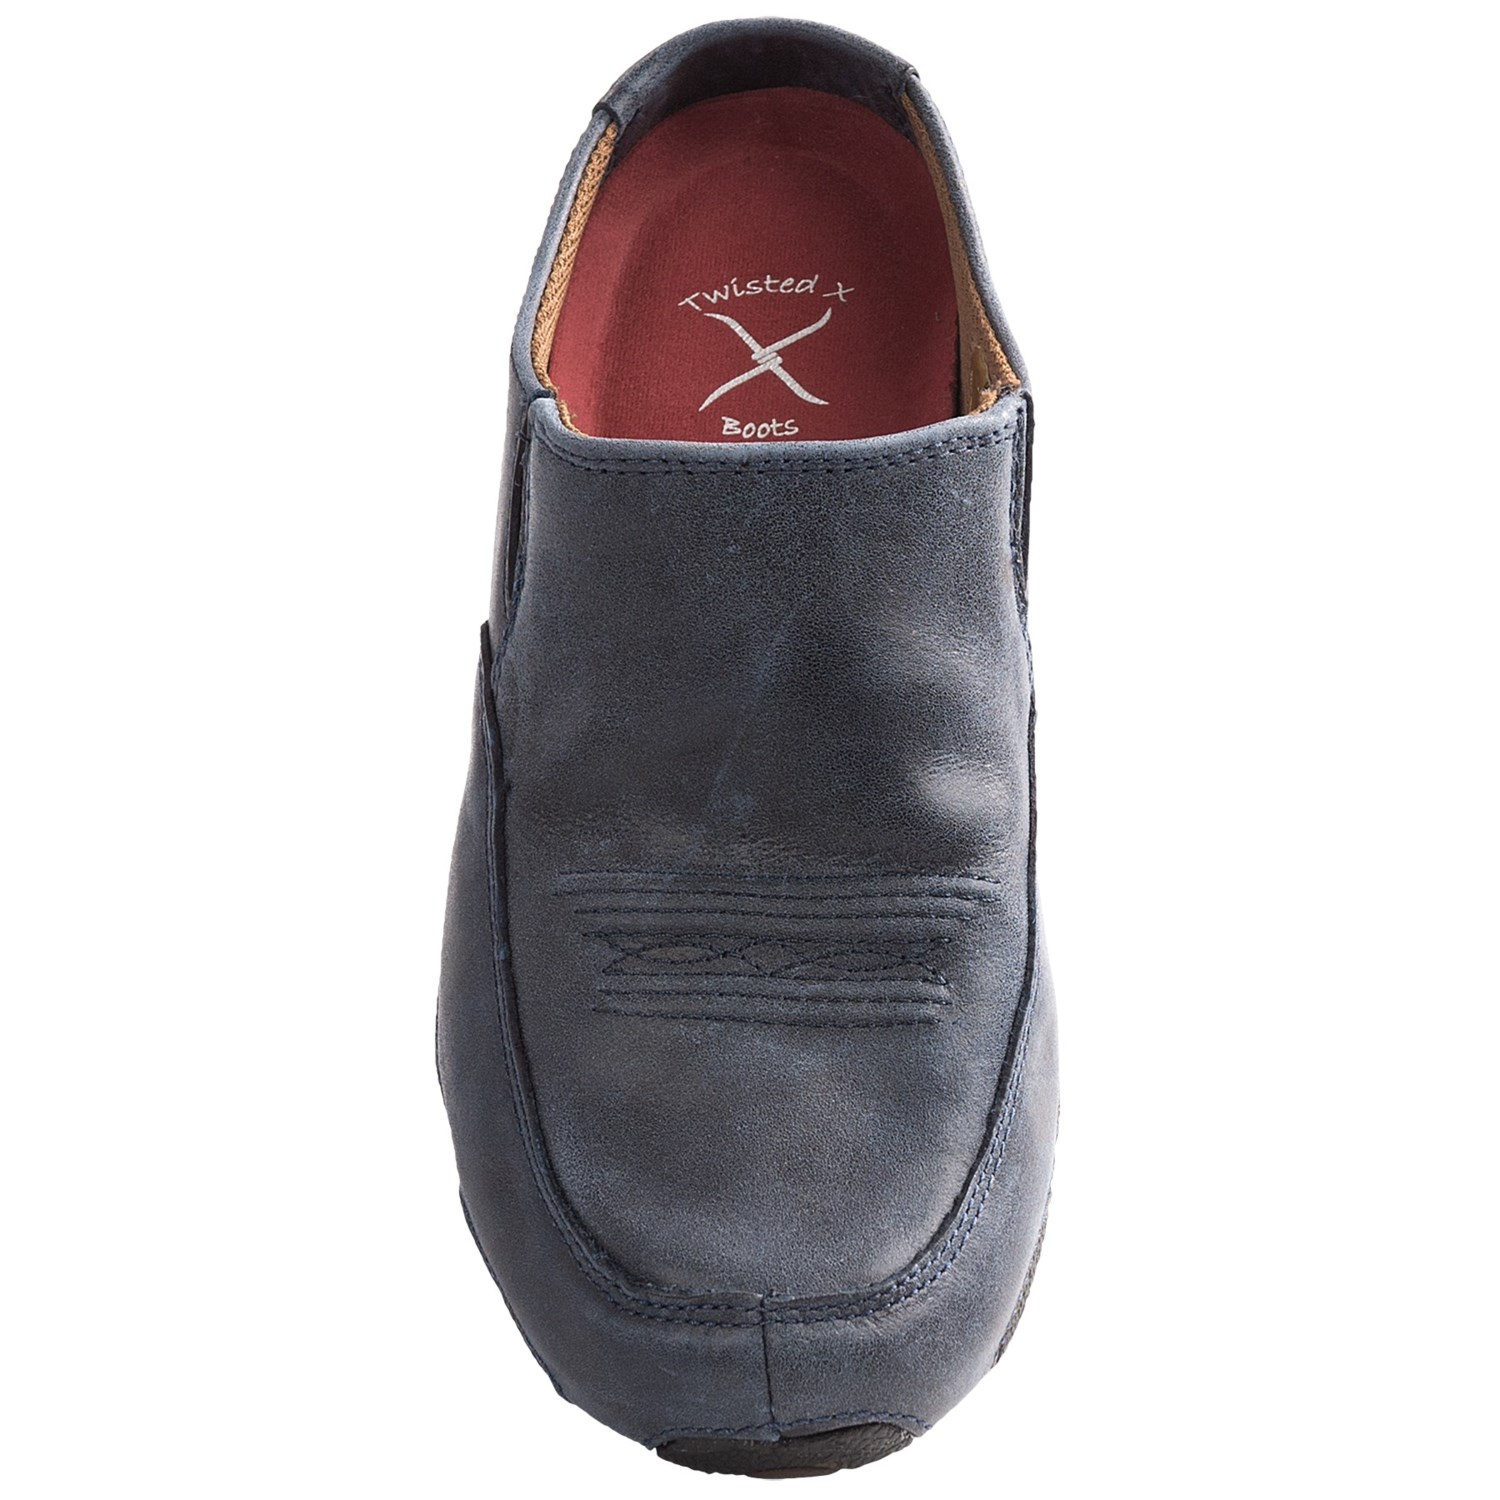 Twisted X Boots Driving Moc Mule Shoes (For Women) 6527X - Save 75%